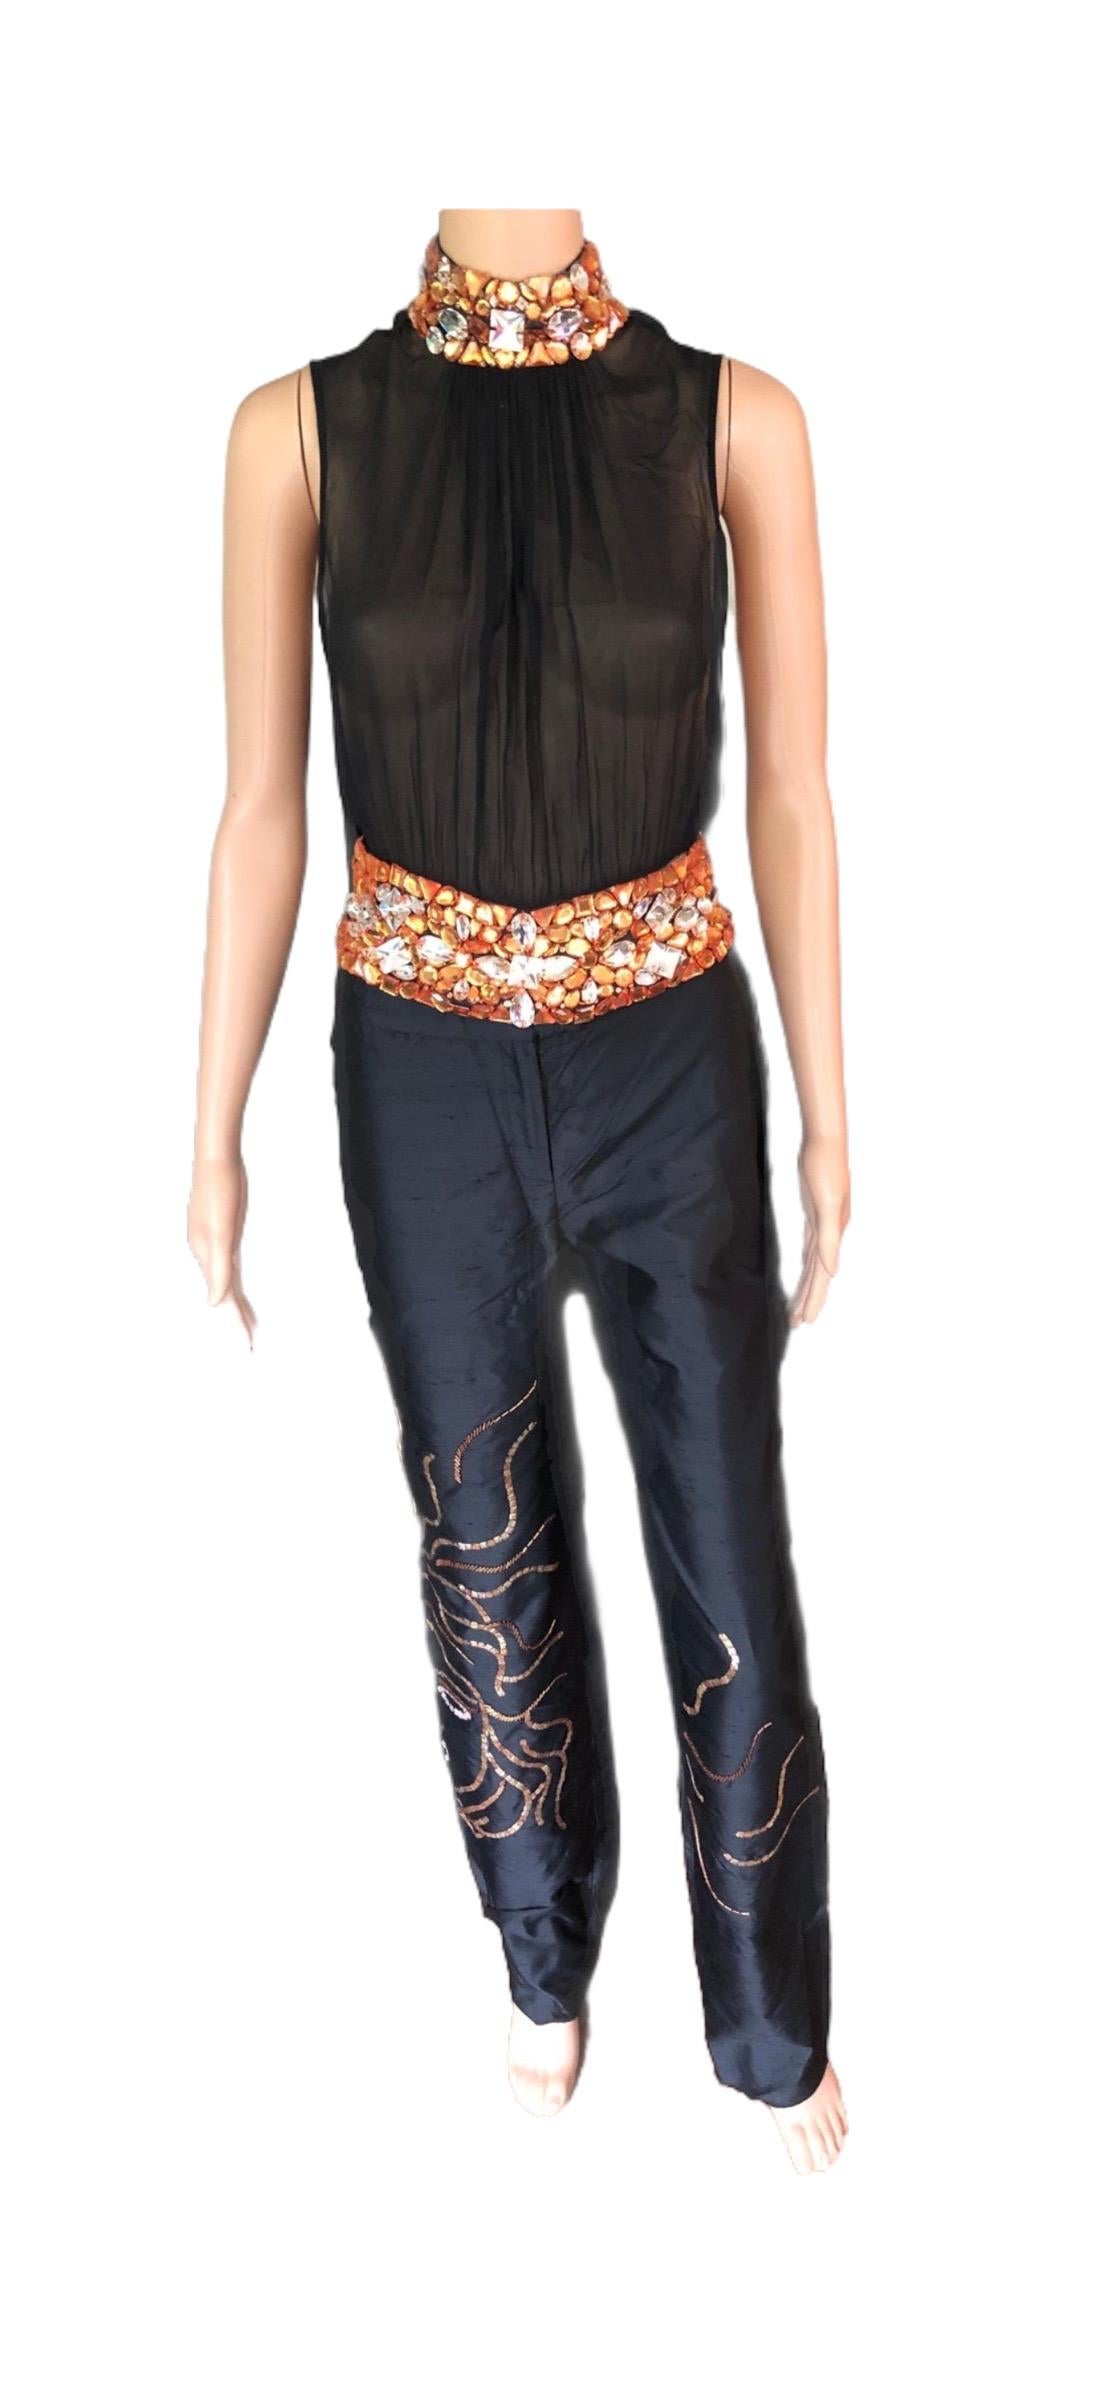 Gianni Versace Couture S/S 2000 Runway Embellished Sheer Top & Pants 2 Piece Set For Sale 4